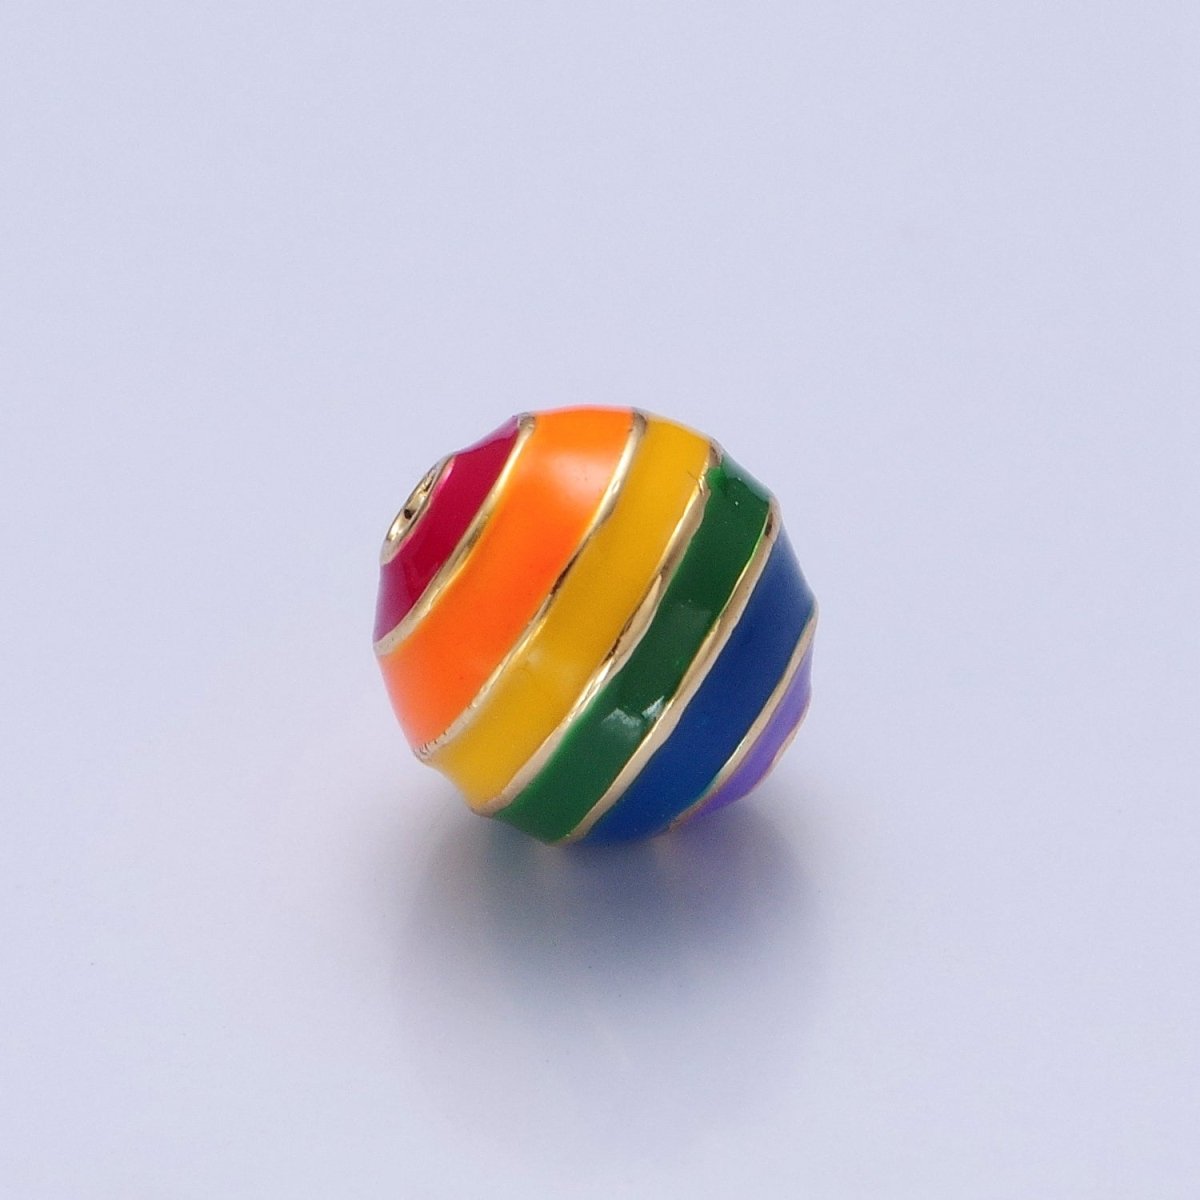 Ball Pride Flag Bead LGBTQ Pendant 14k Gold Filled 10mm Round Bead Trans Gay Pansexual Nonbinary Non Binary Bisexual Asexual B-342 B-428 B-434 B-440 B-441 - DLUXCA